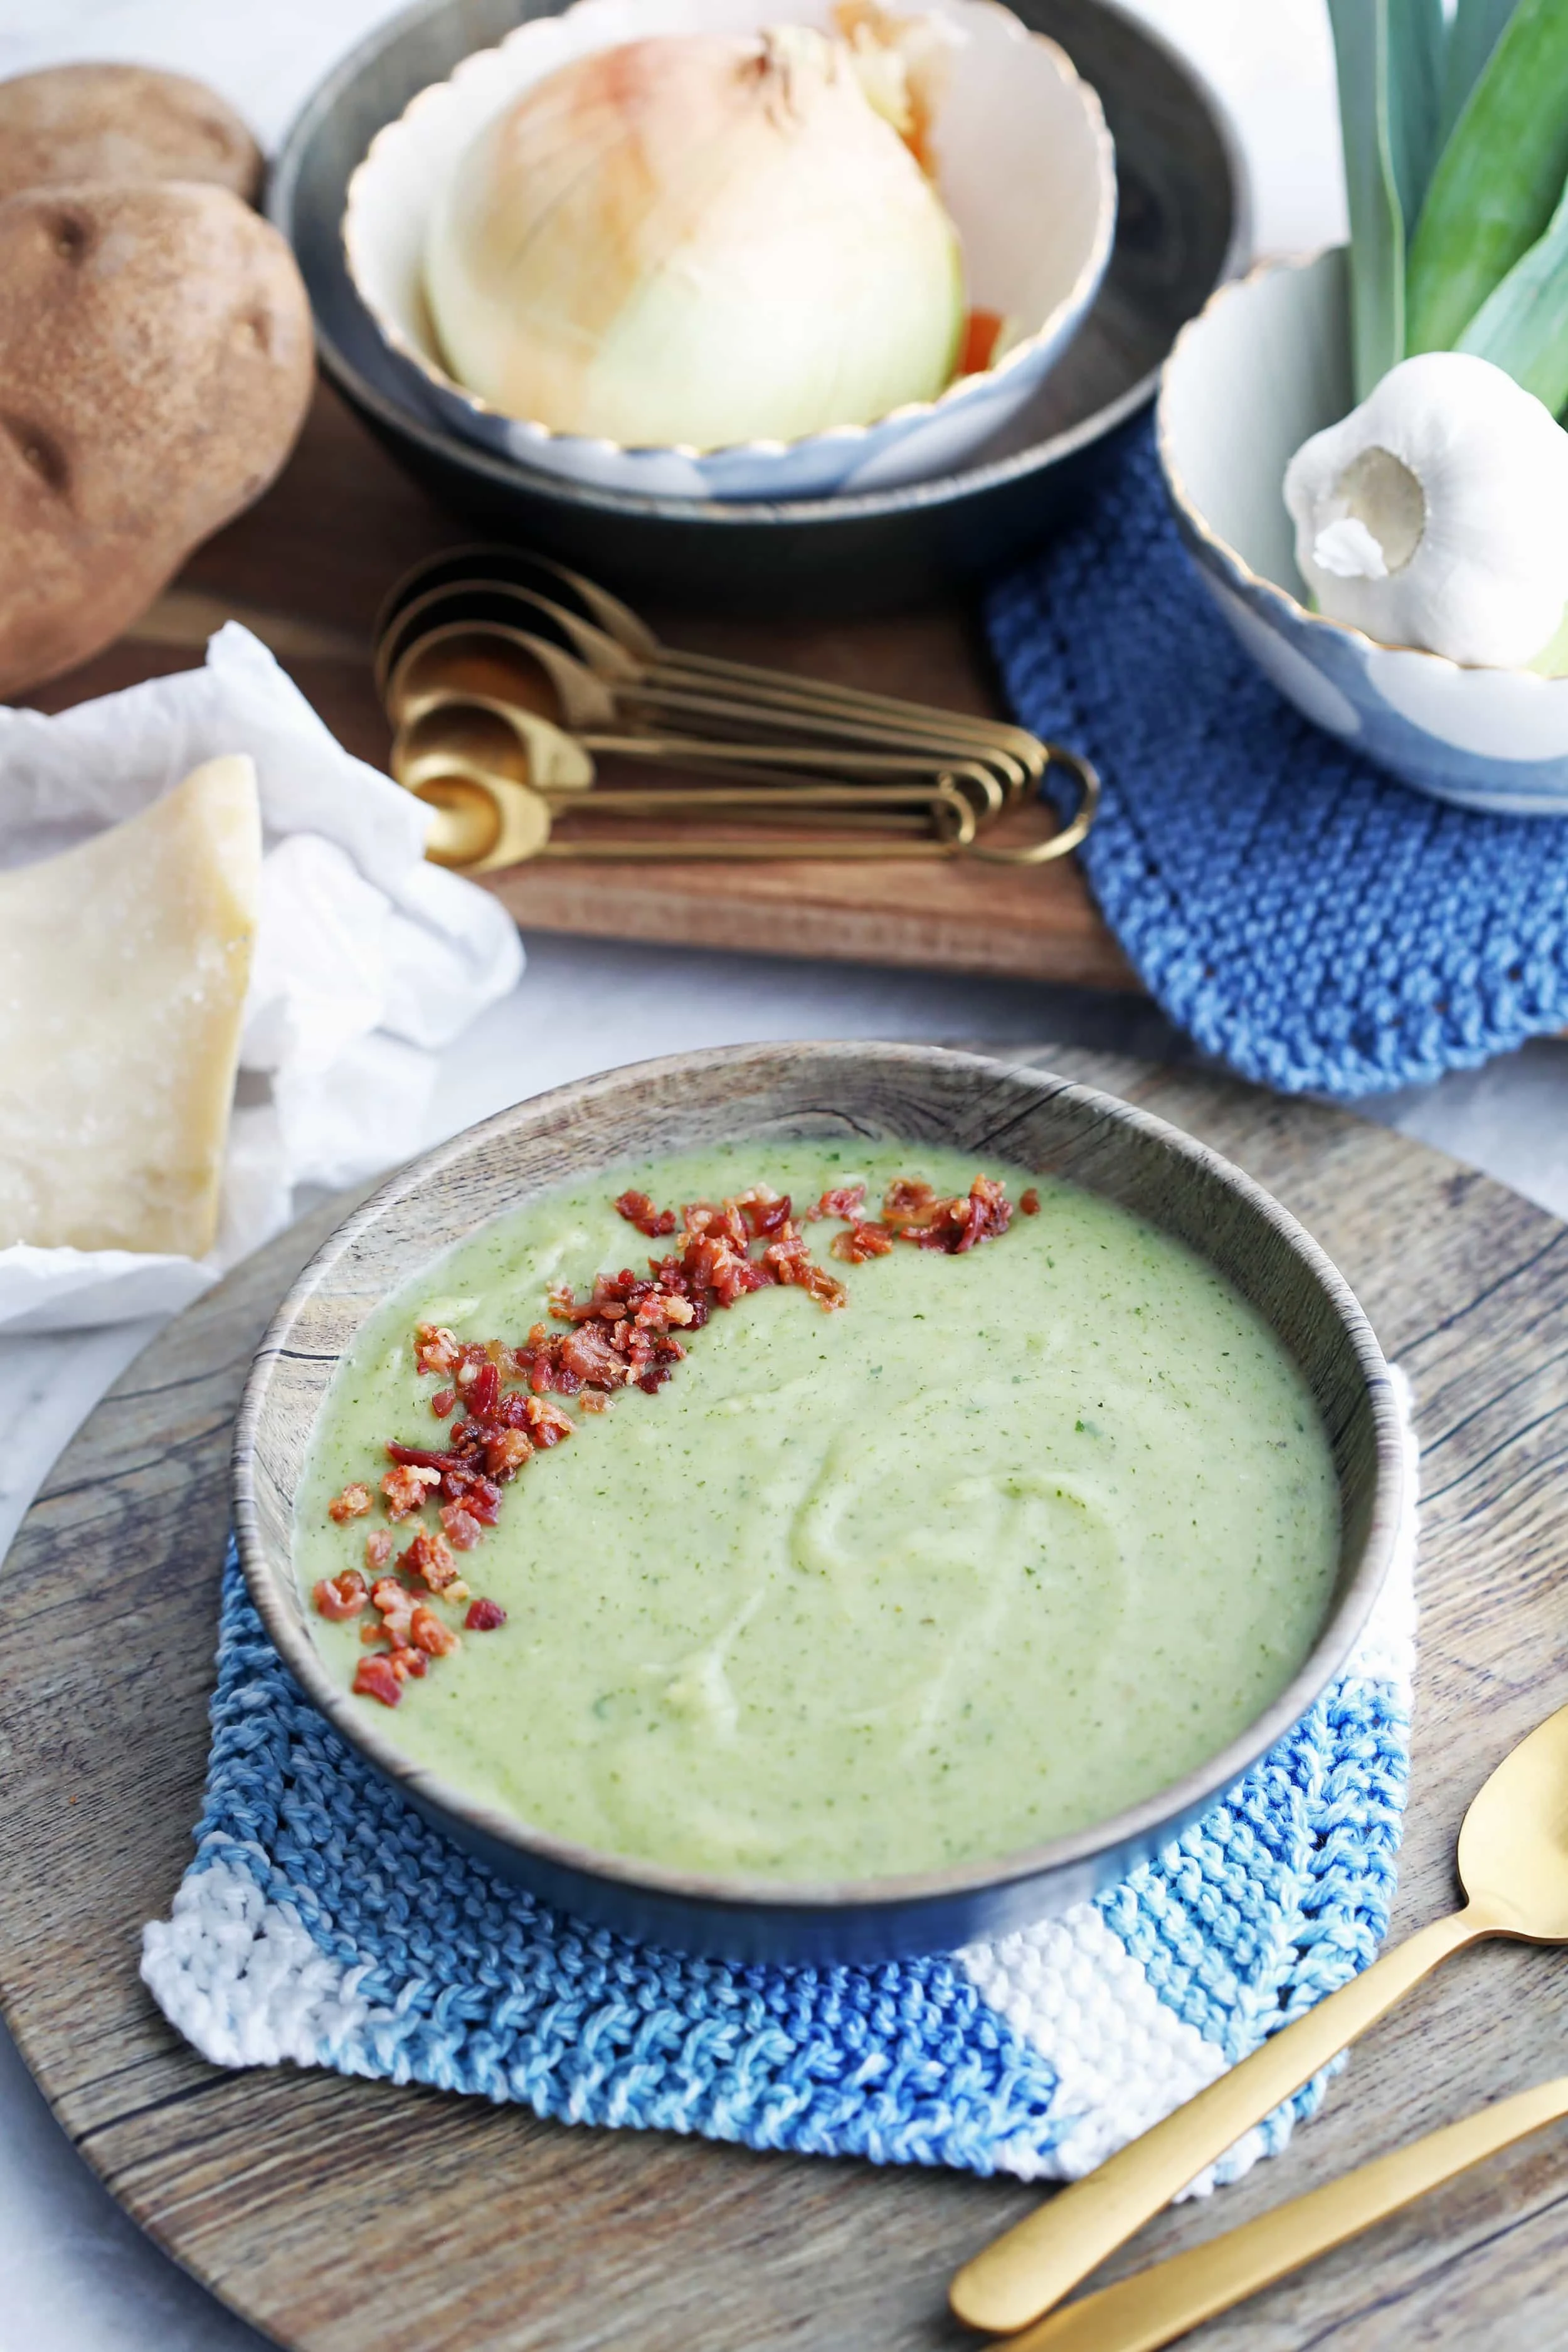 Creamy Potato Leek Soup with Spinach and Parmesan that's topped with bacon bits in a wooden bowl.